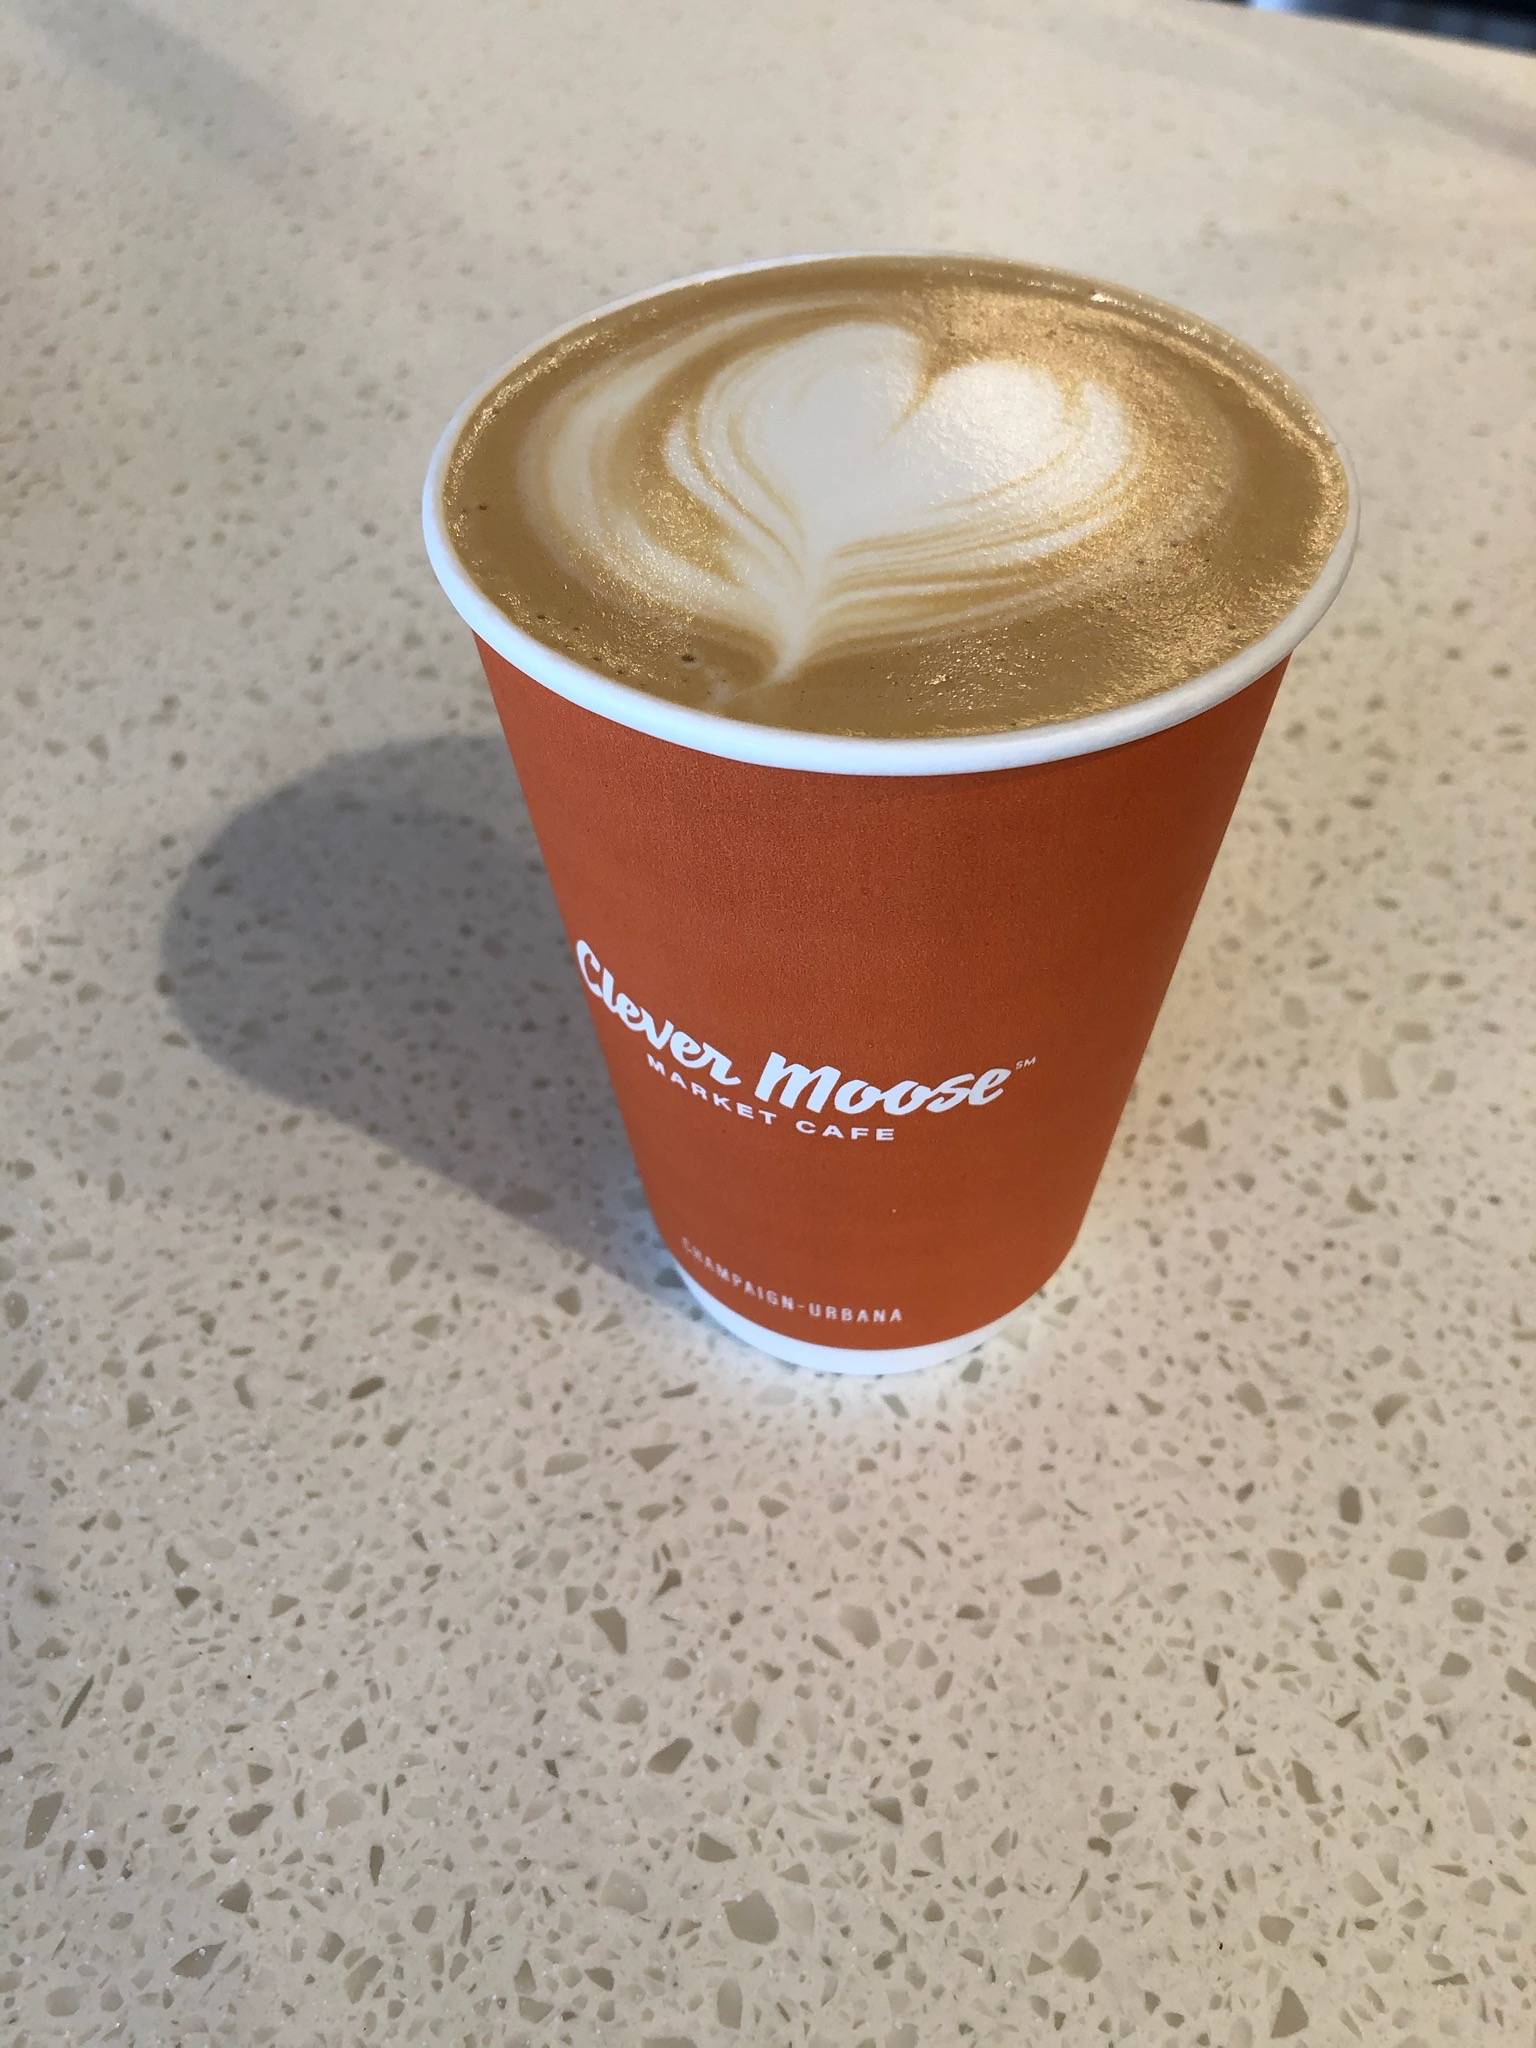 A heart appears Clever Moose's latte which is in an orange paper to go go on a speckled counter. Photo by Betsy Waller.